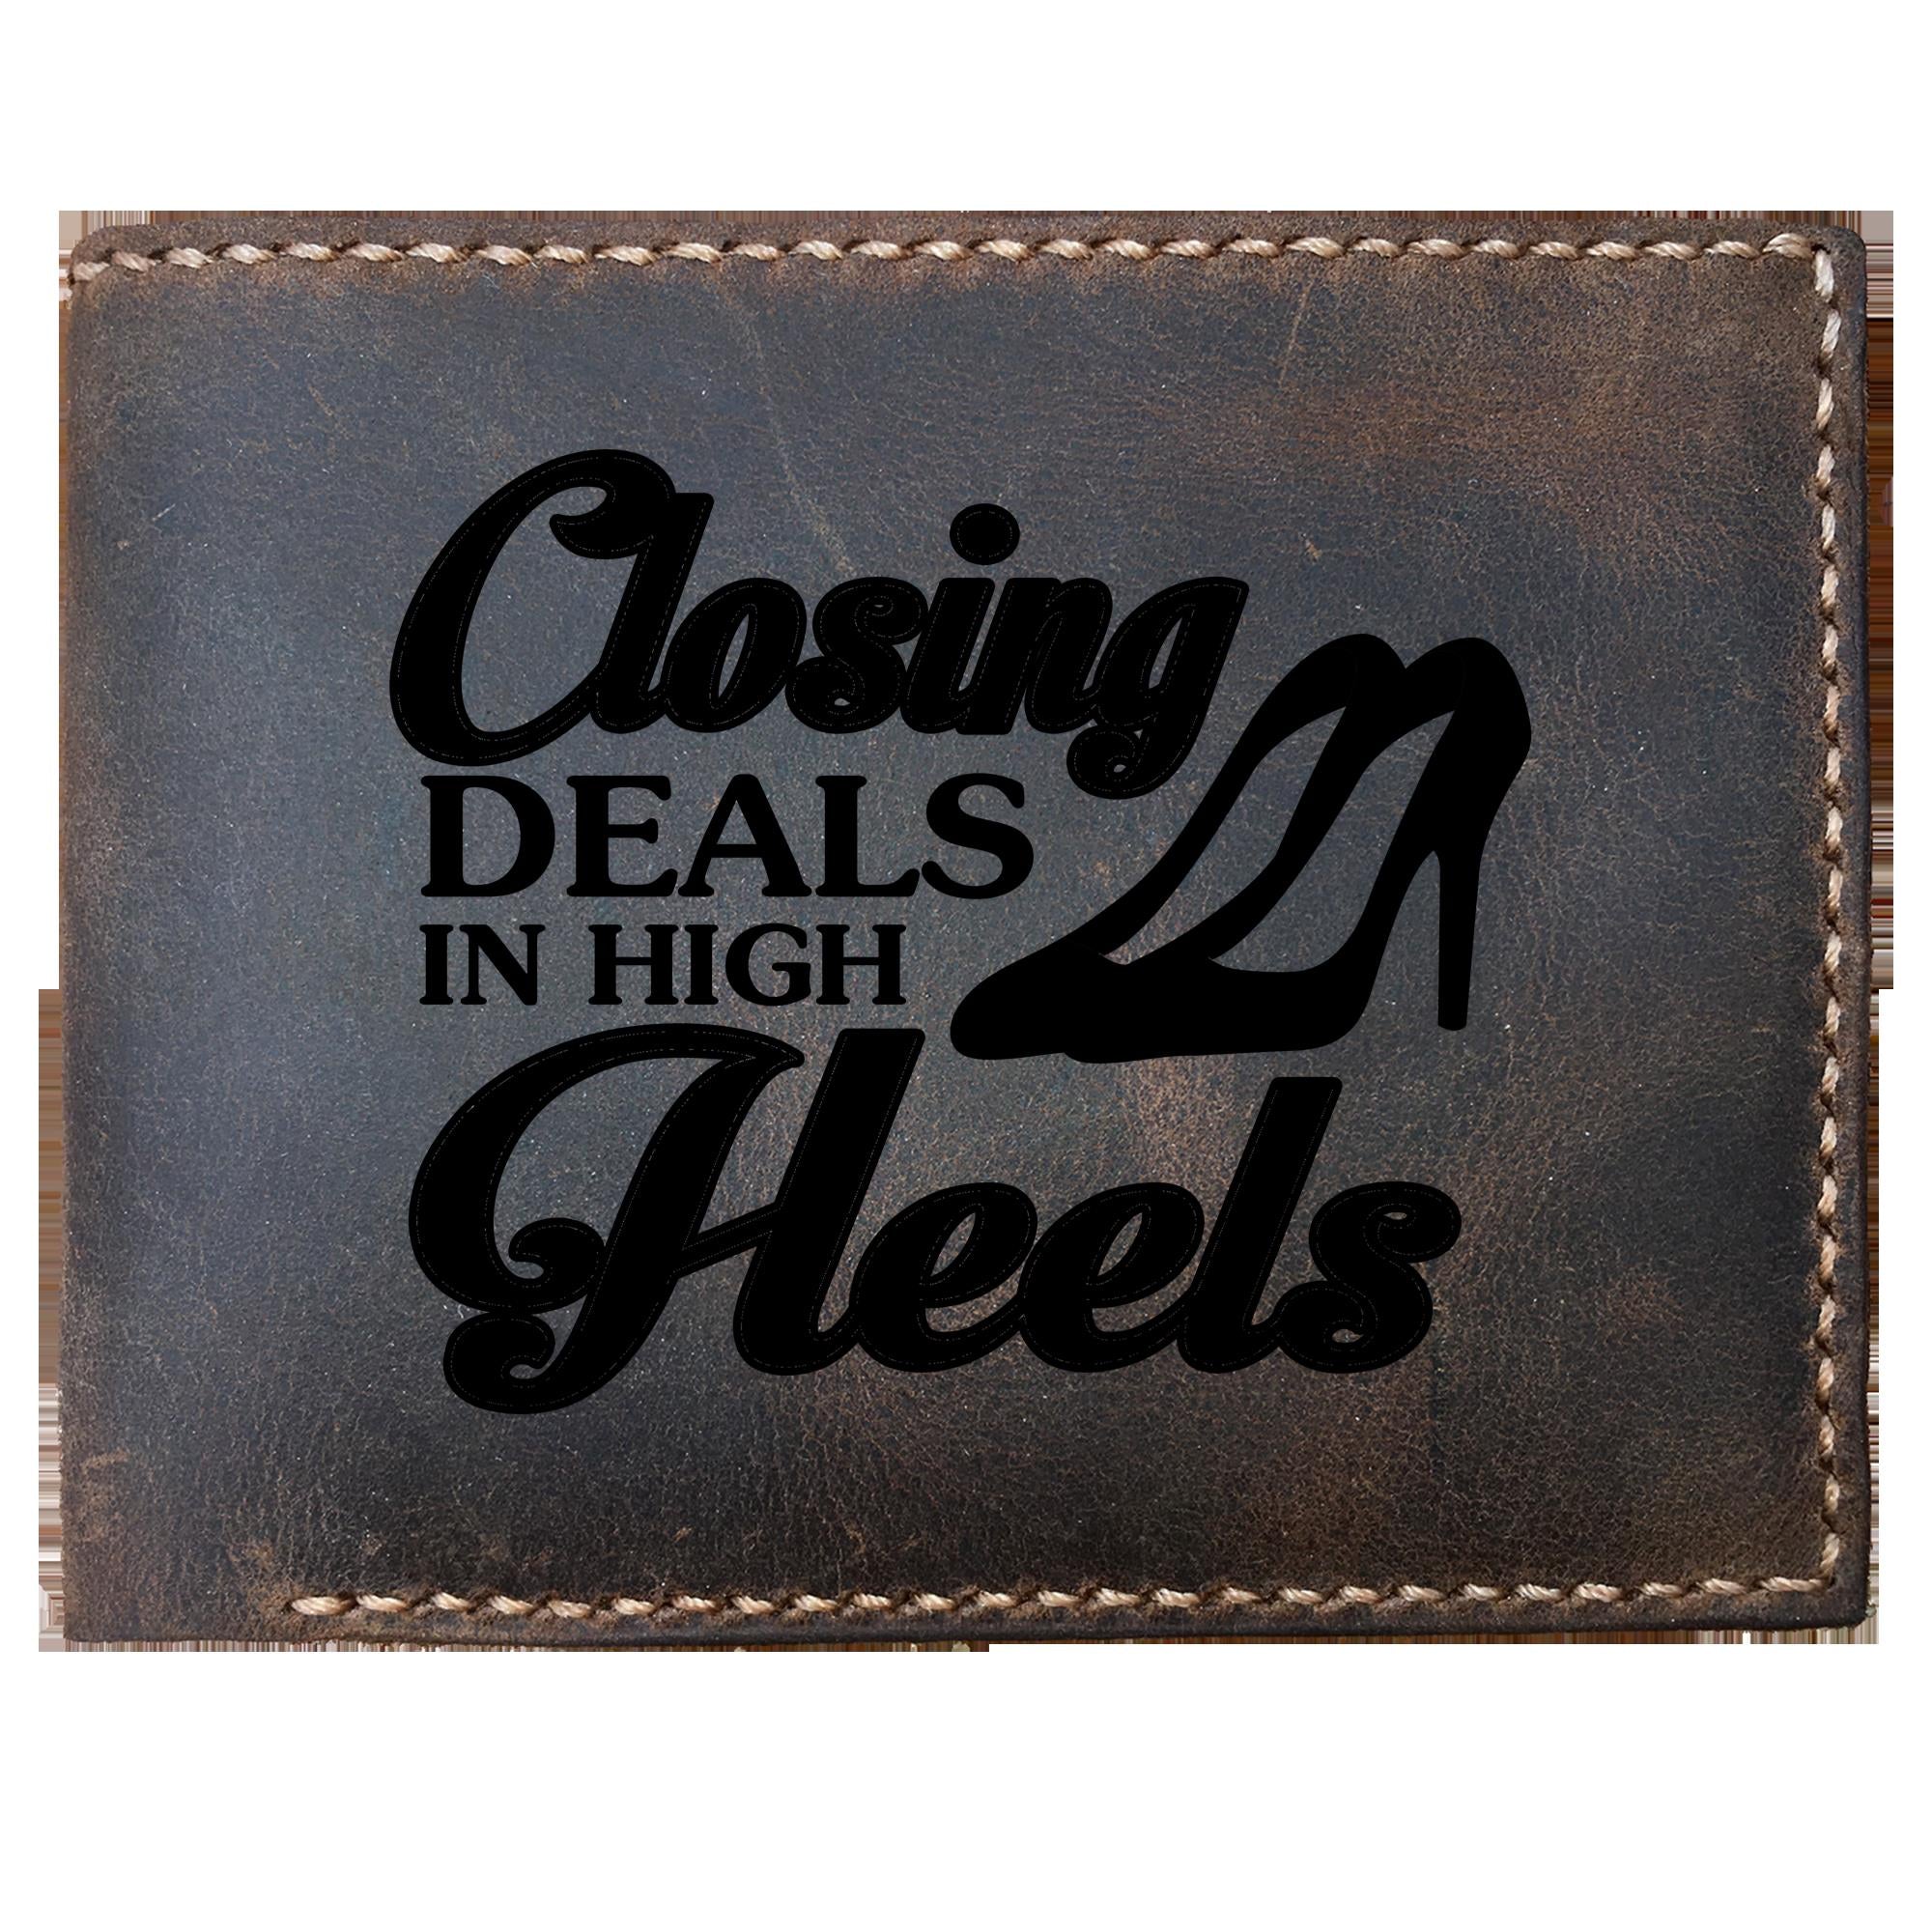 Skitongifts Funny Custom Laser Engraved Bifold Leather Wallet For Men, Closing Deals In High Heels Funny Realtor Ideas